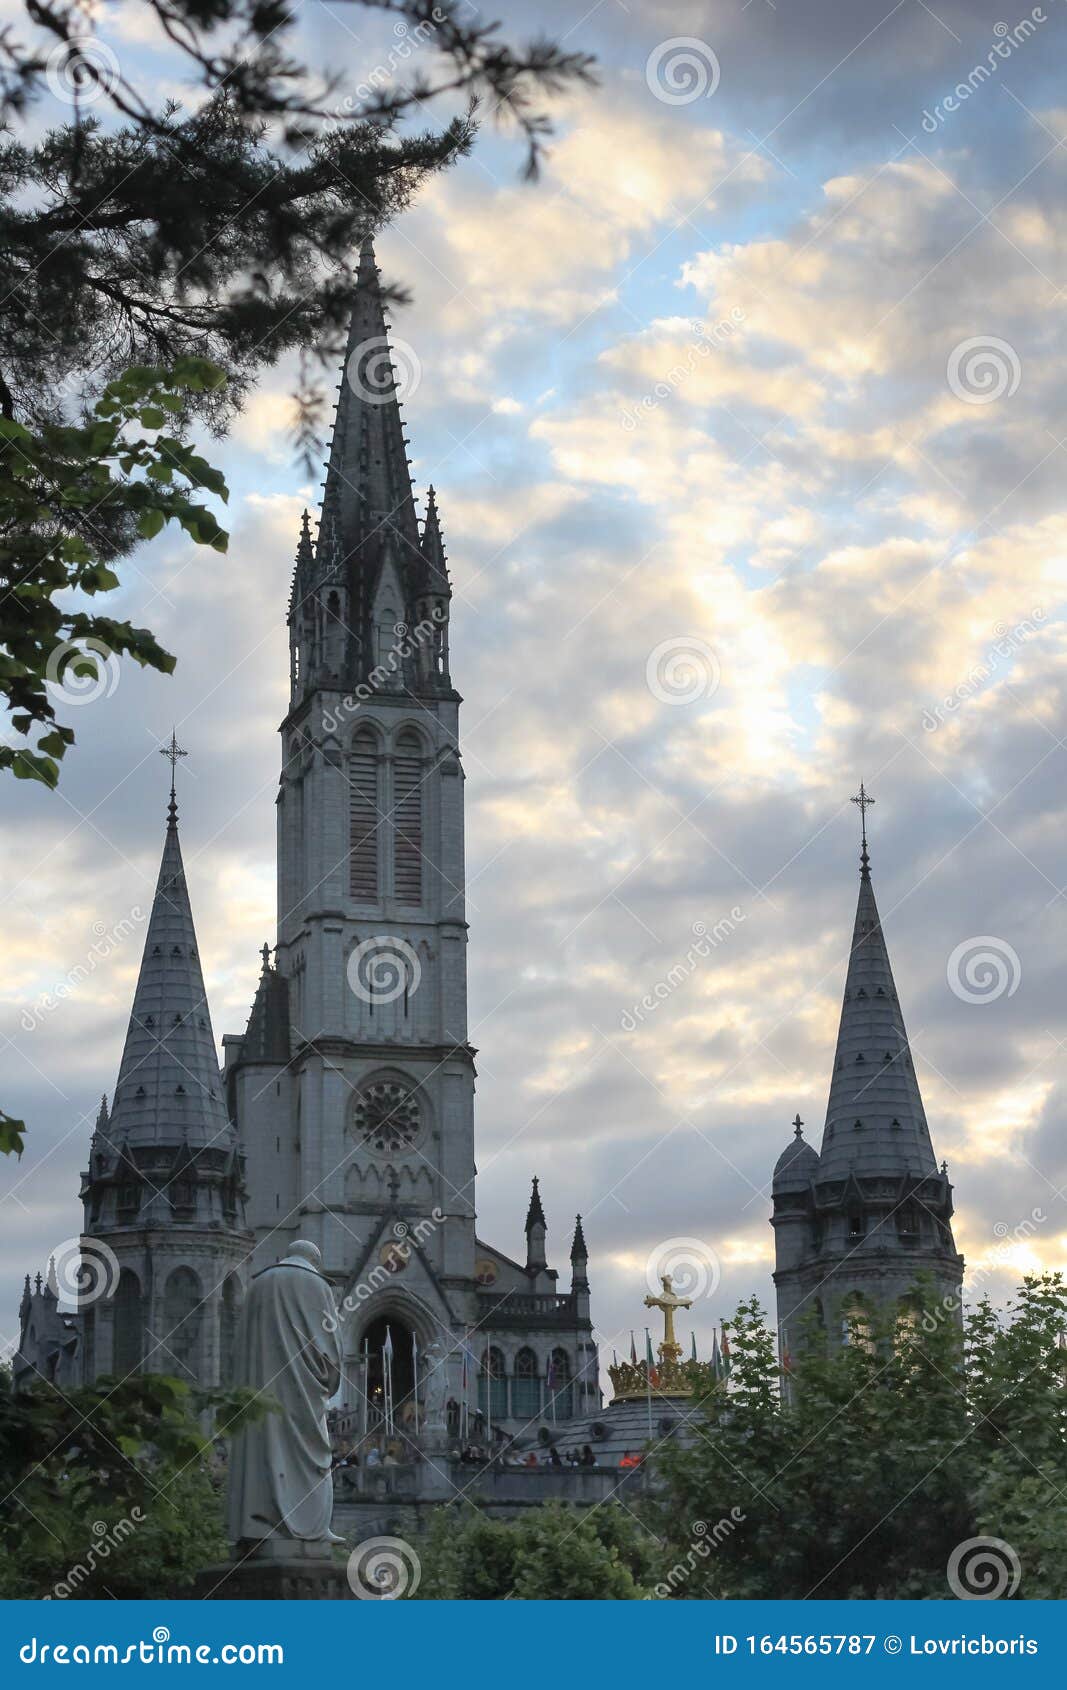 Sanctuary of Our Lady of Lourdes Stock Image - Image of holy, building ...